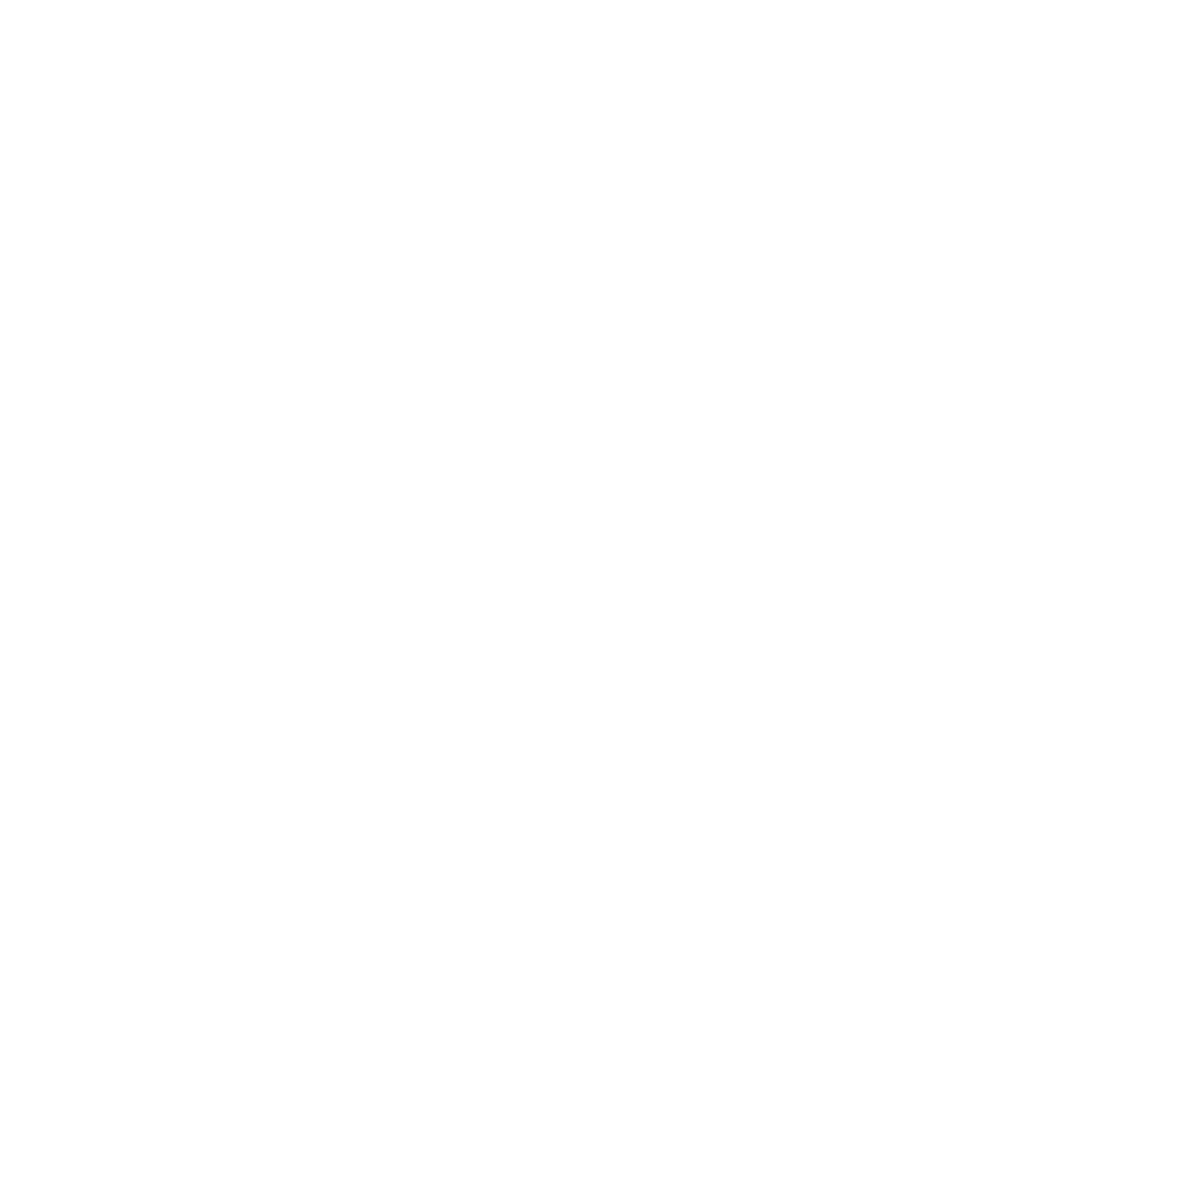 72_Sunny-01.png